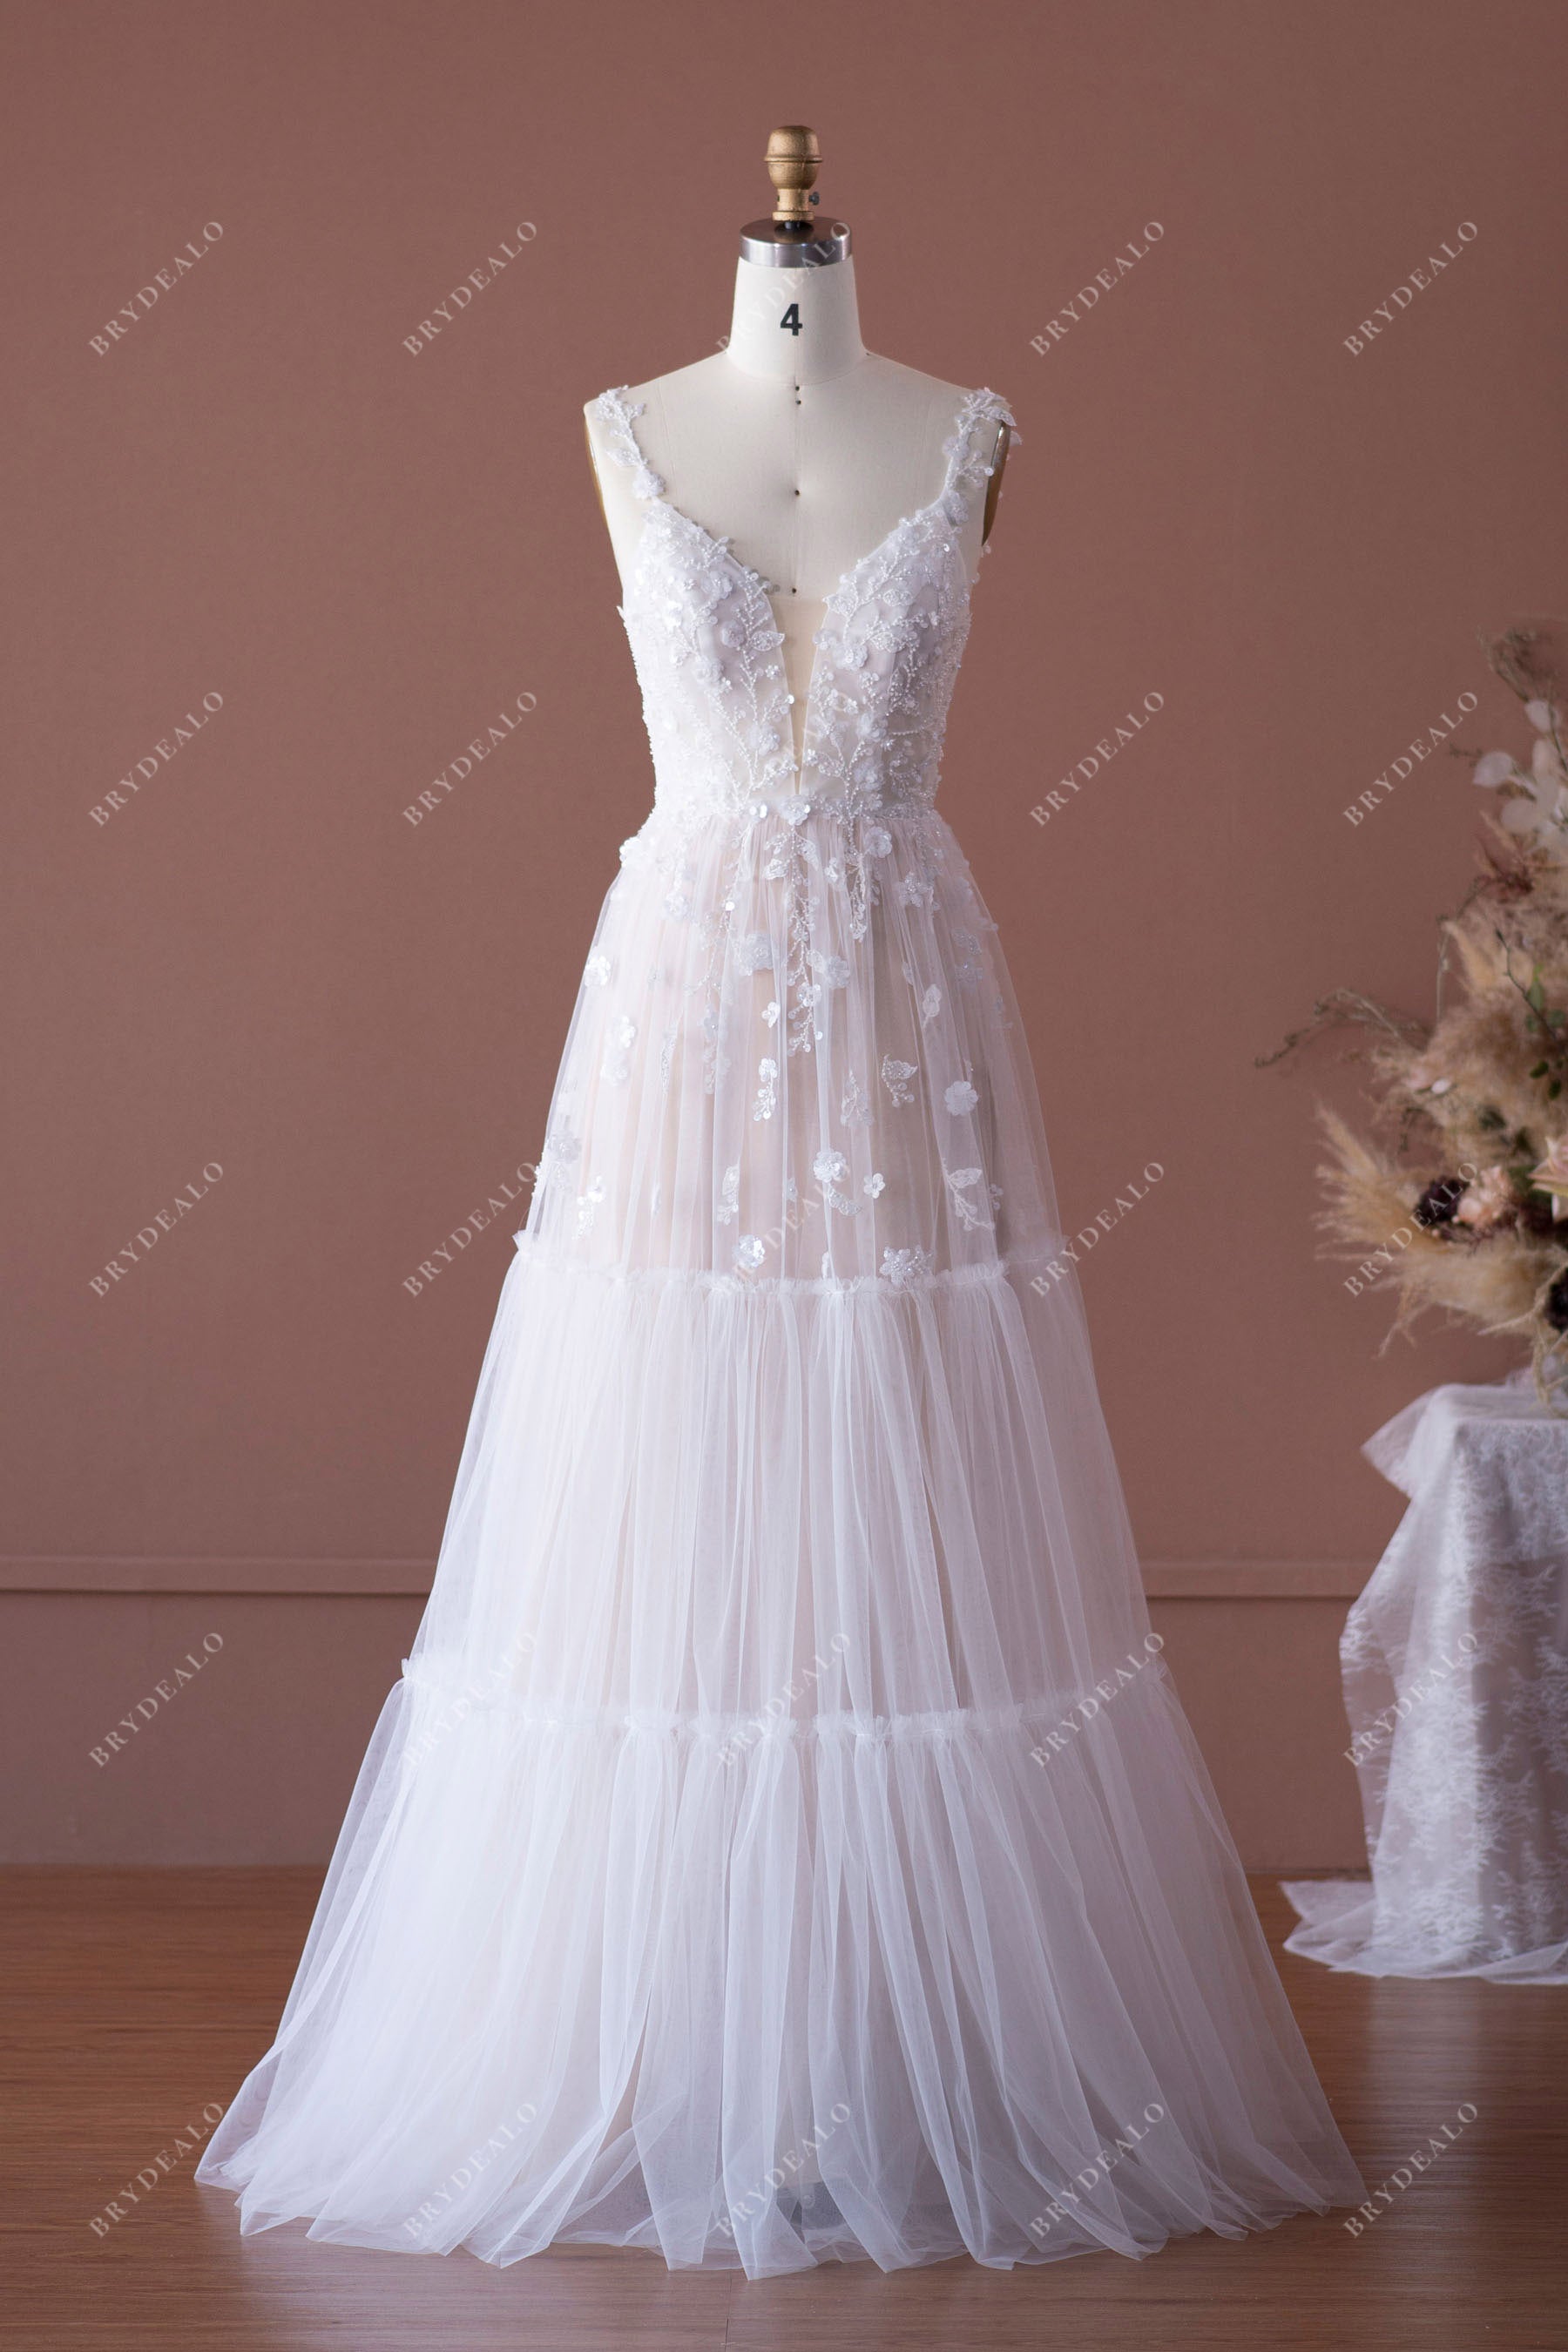 Fairy Flower Lace Layered A-line Wedding Dress Sample